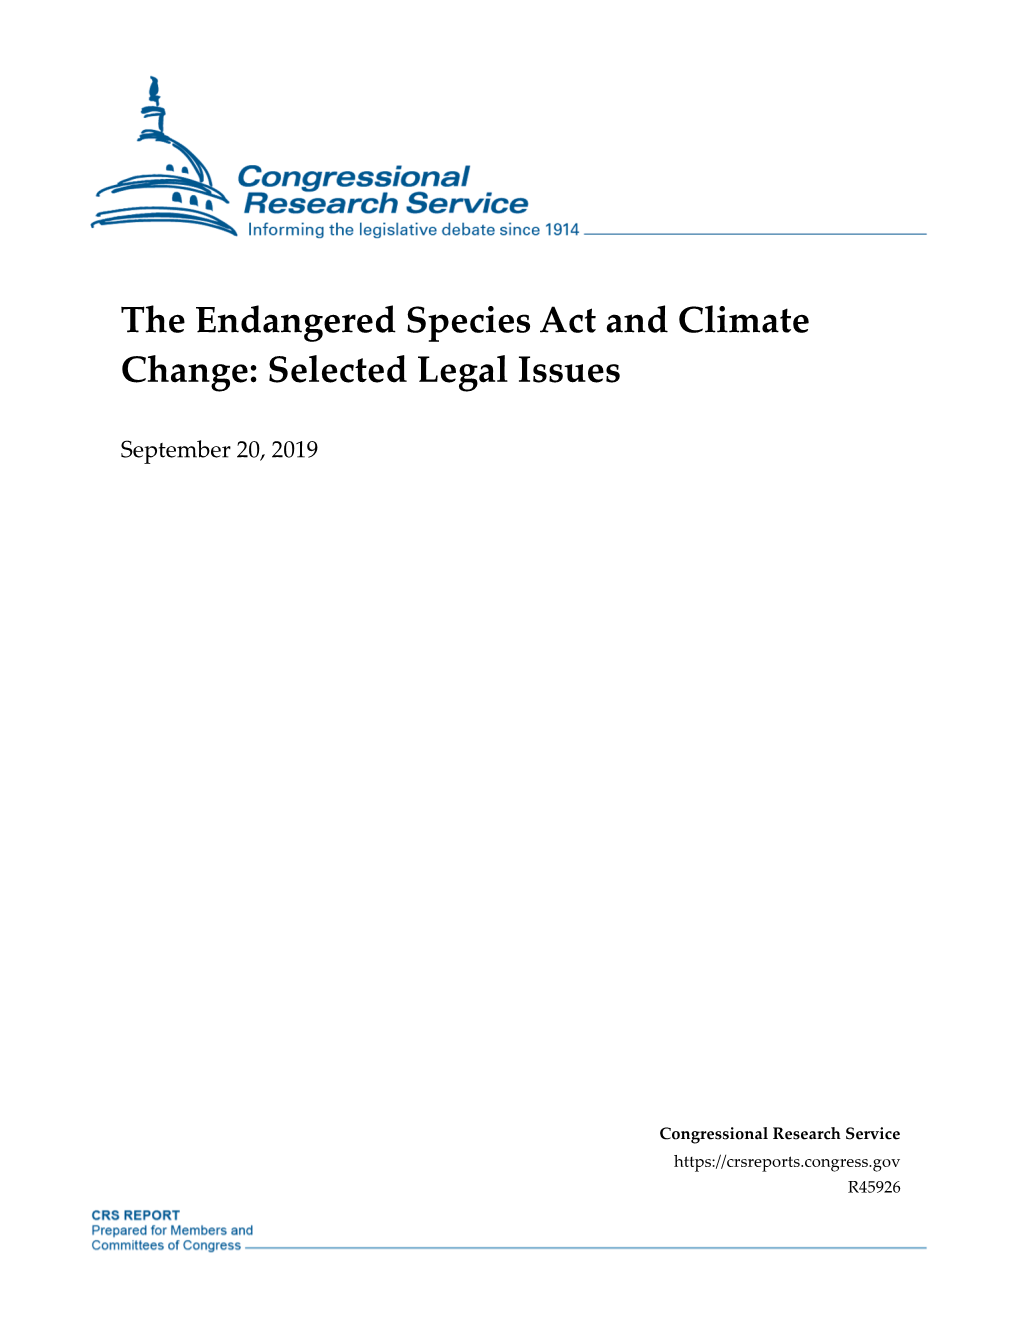 The Endangered Species Act and Climate Change: Selected Legal Issues